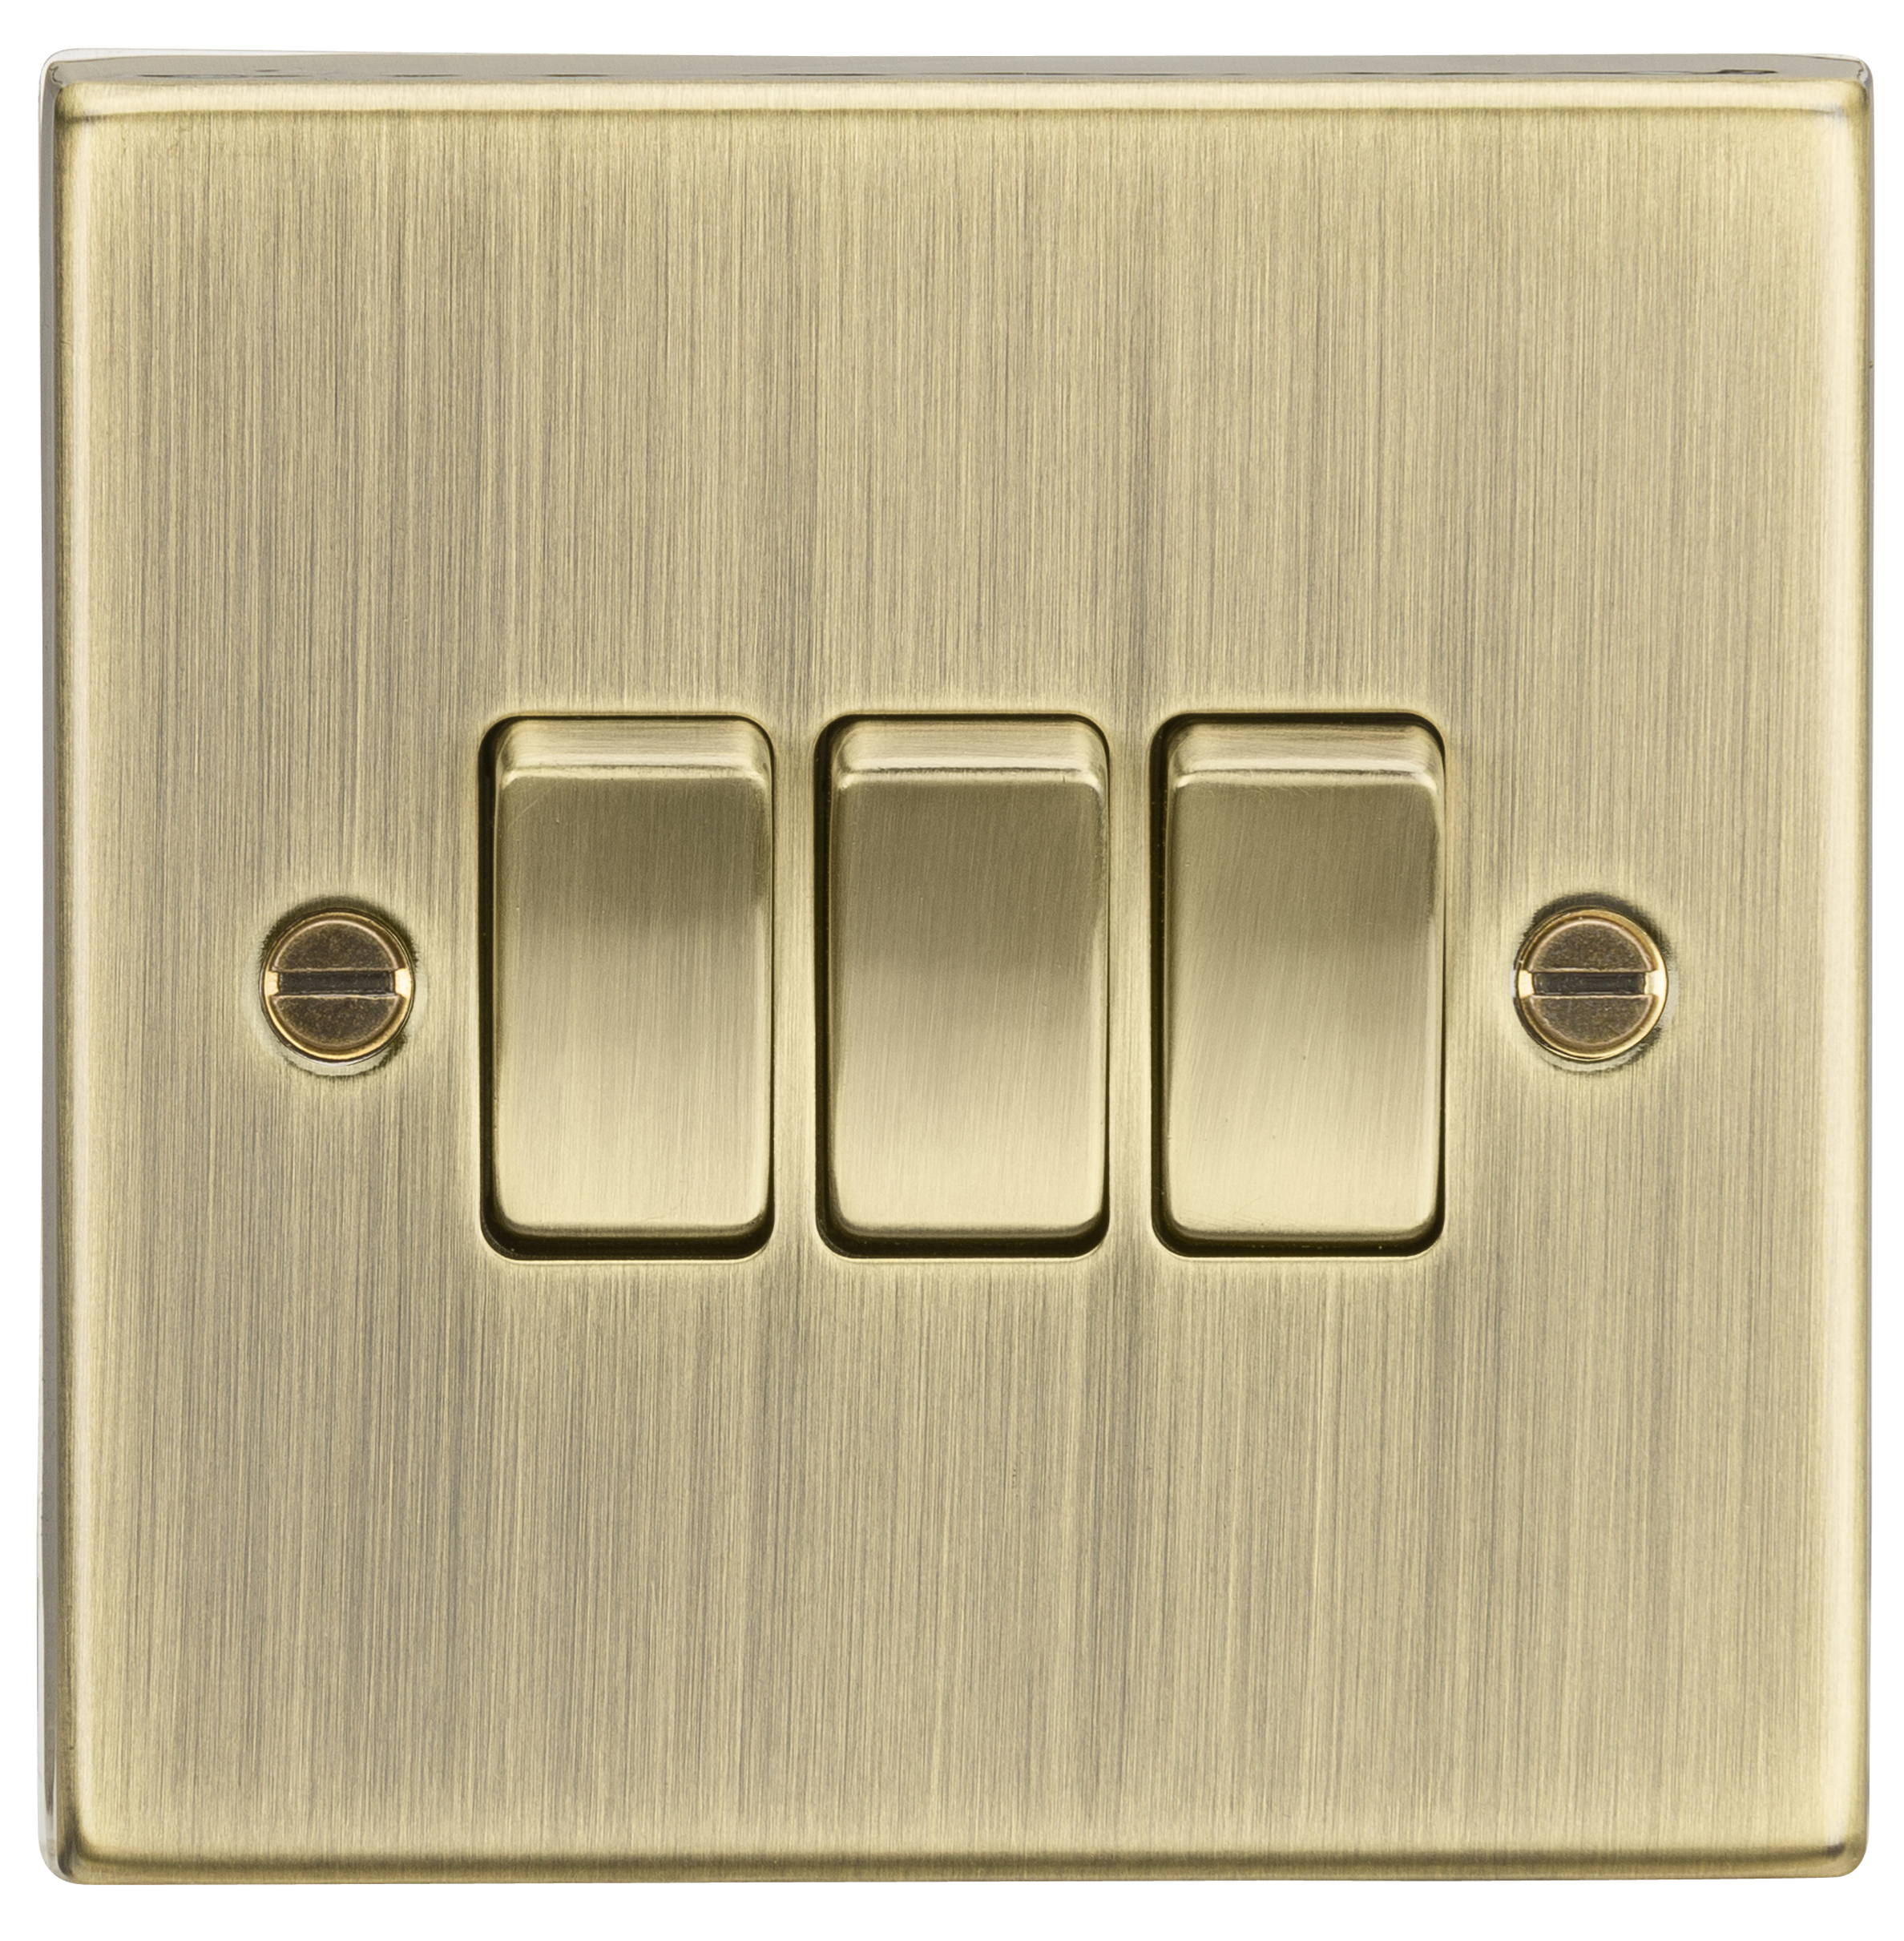 10A 3G 2 Way Plate Switch - Square Edge Antique Brass - CS4AB 